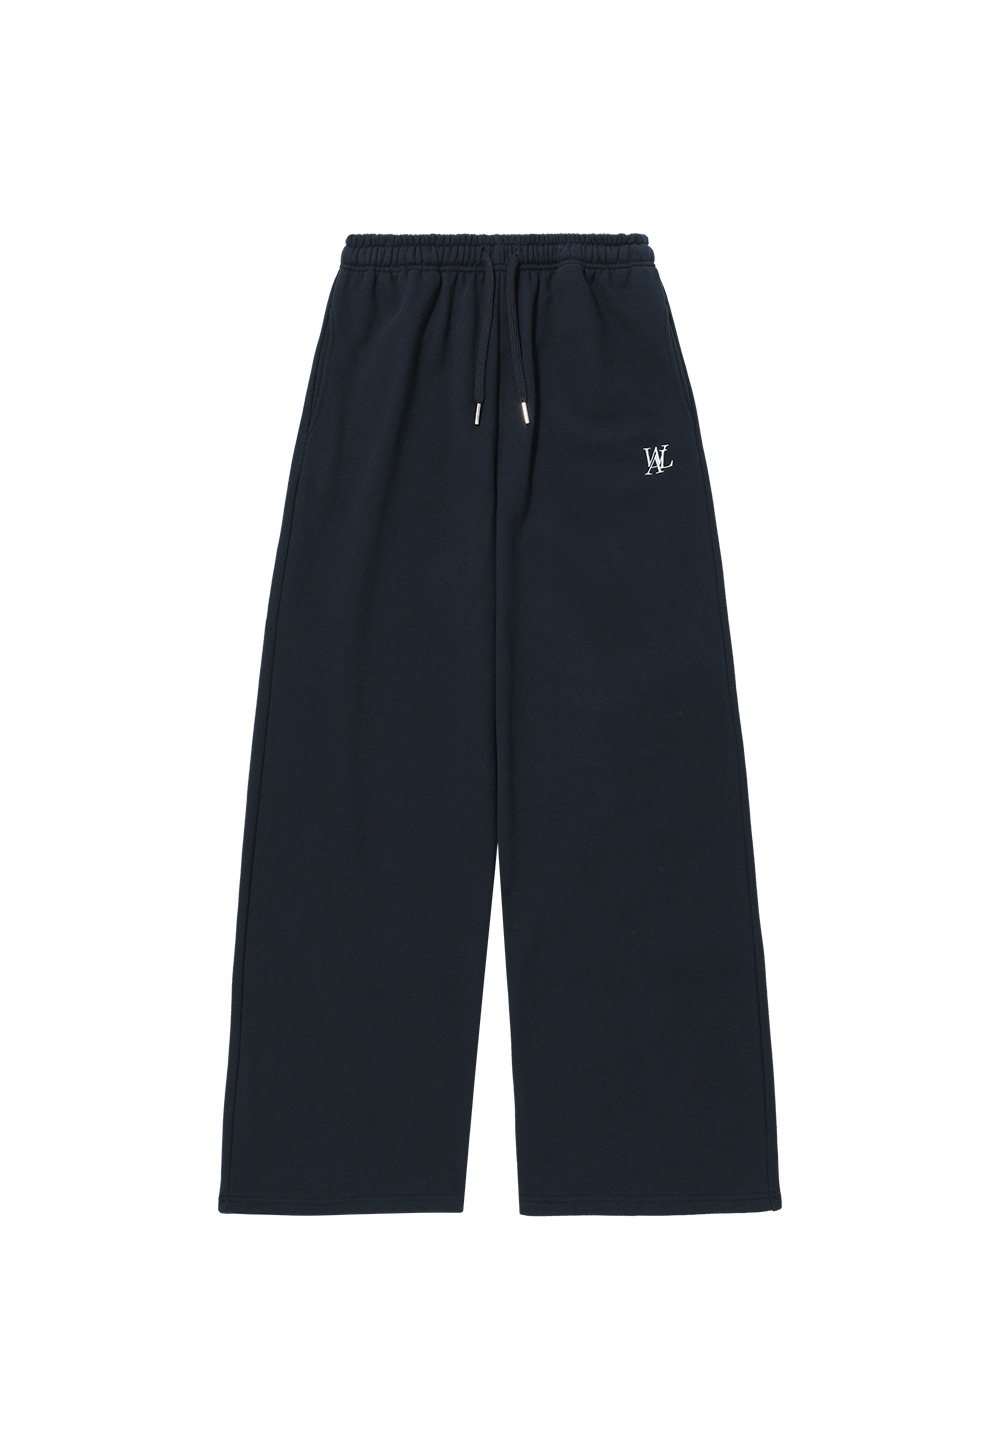 Signature relax wide pants - NAVY